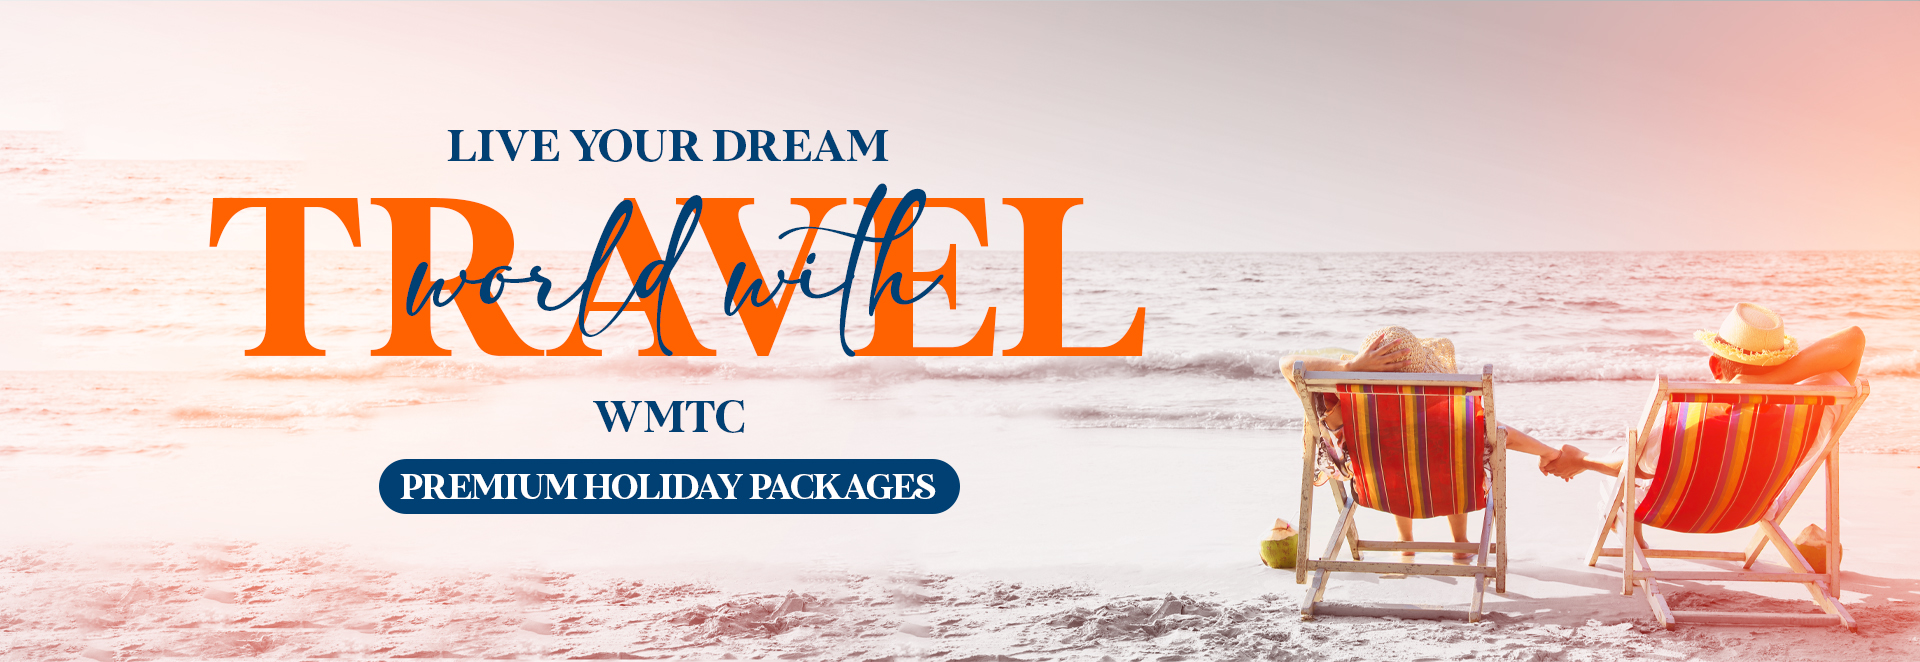 International Tour Packages